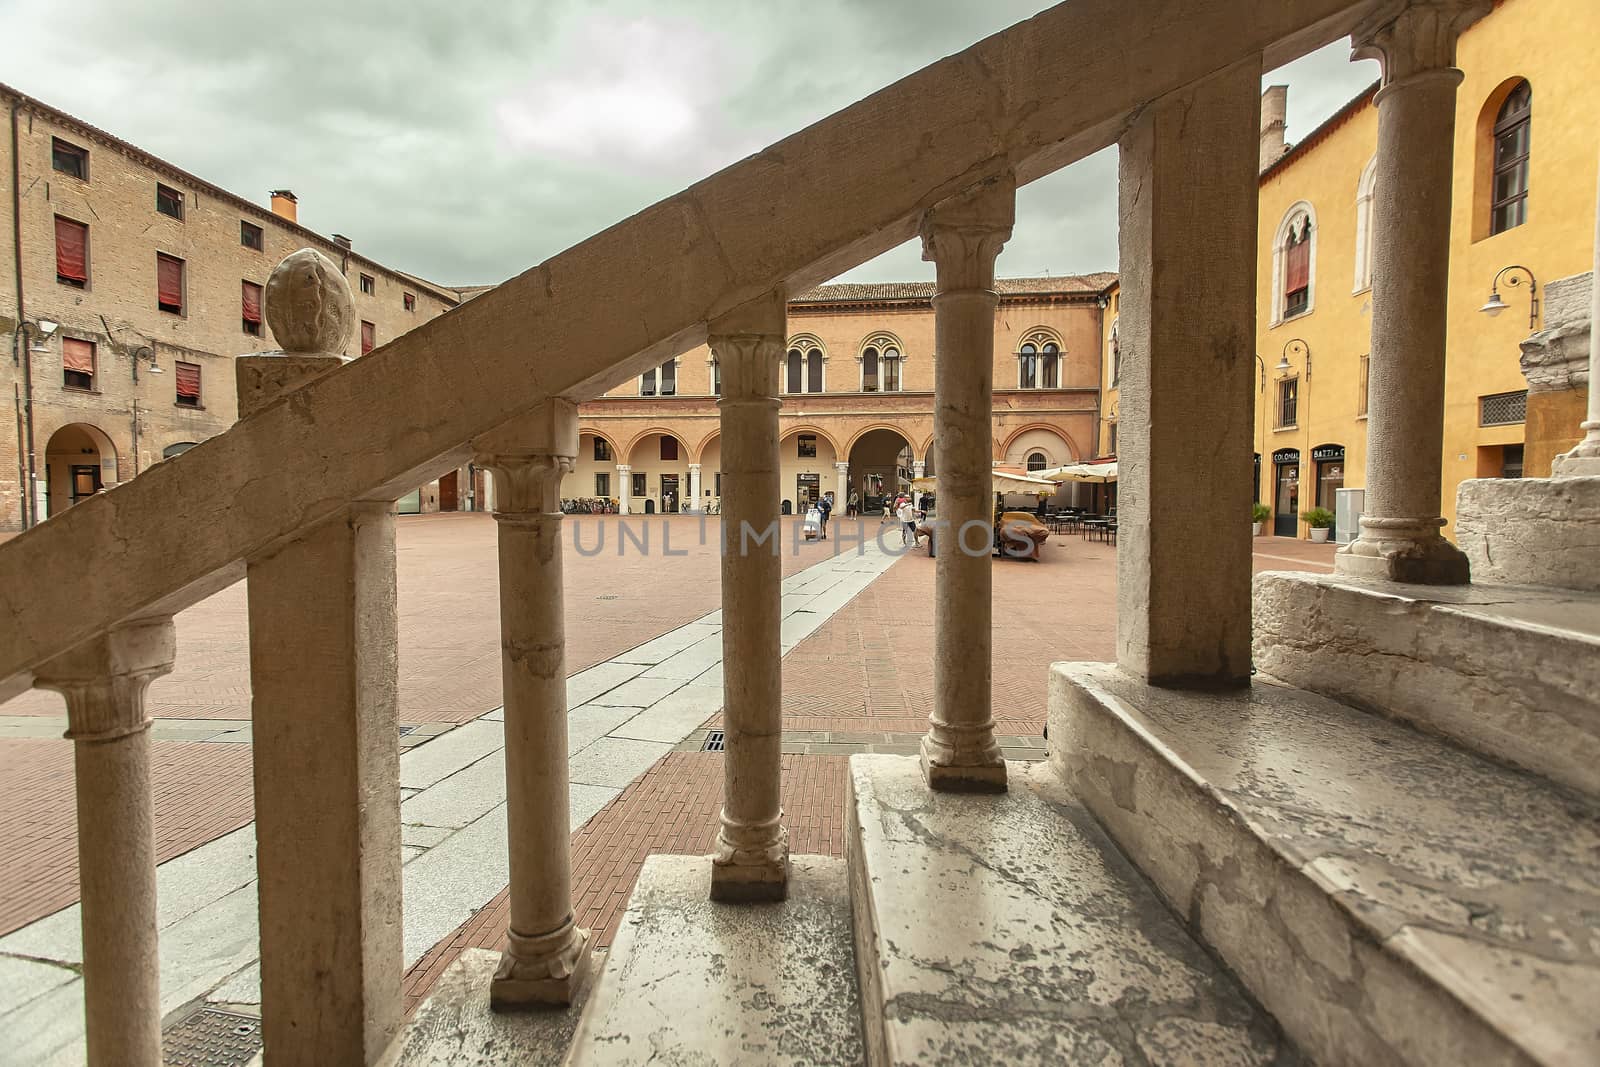 FERRARA, ITALY 29 JULY 2020 : Scalone d'onore in Ferrara a famuos historic staircase of town hall building in Italy